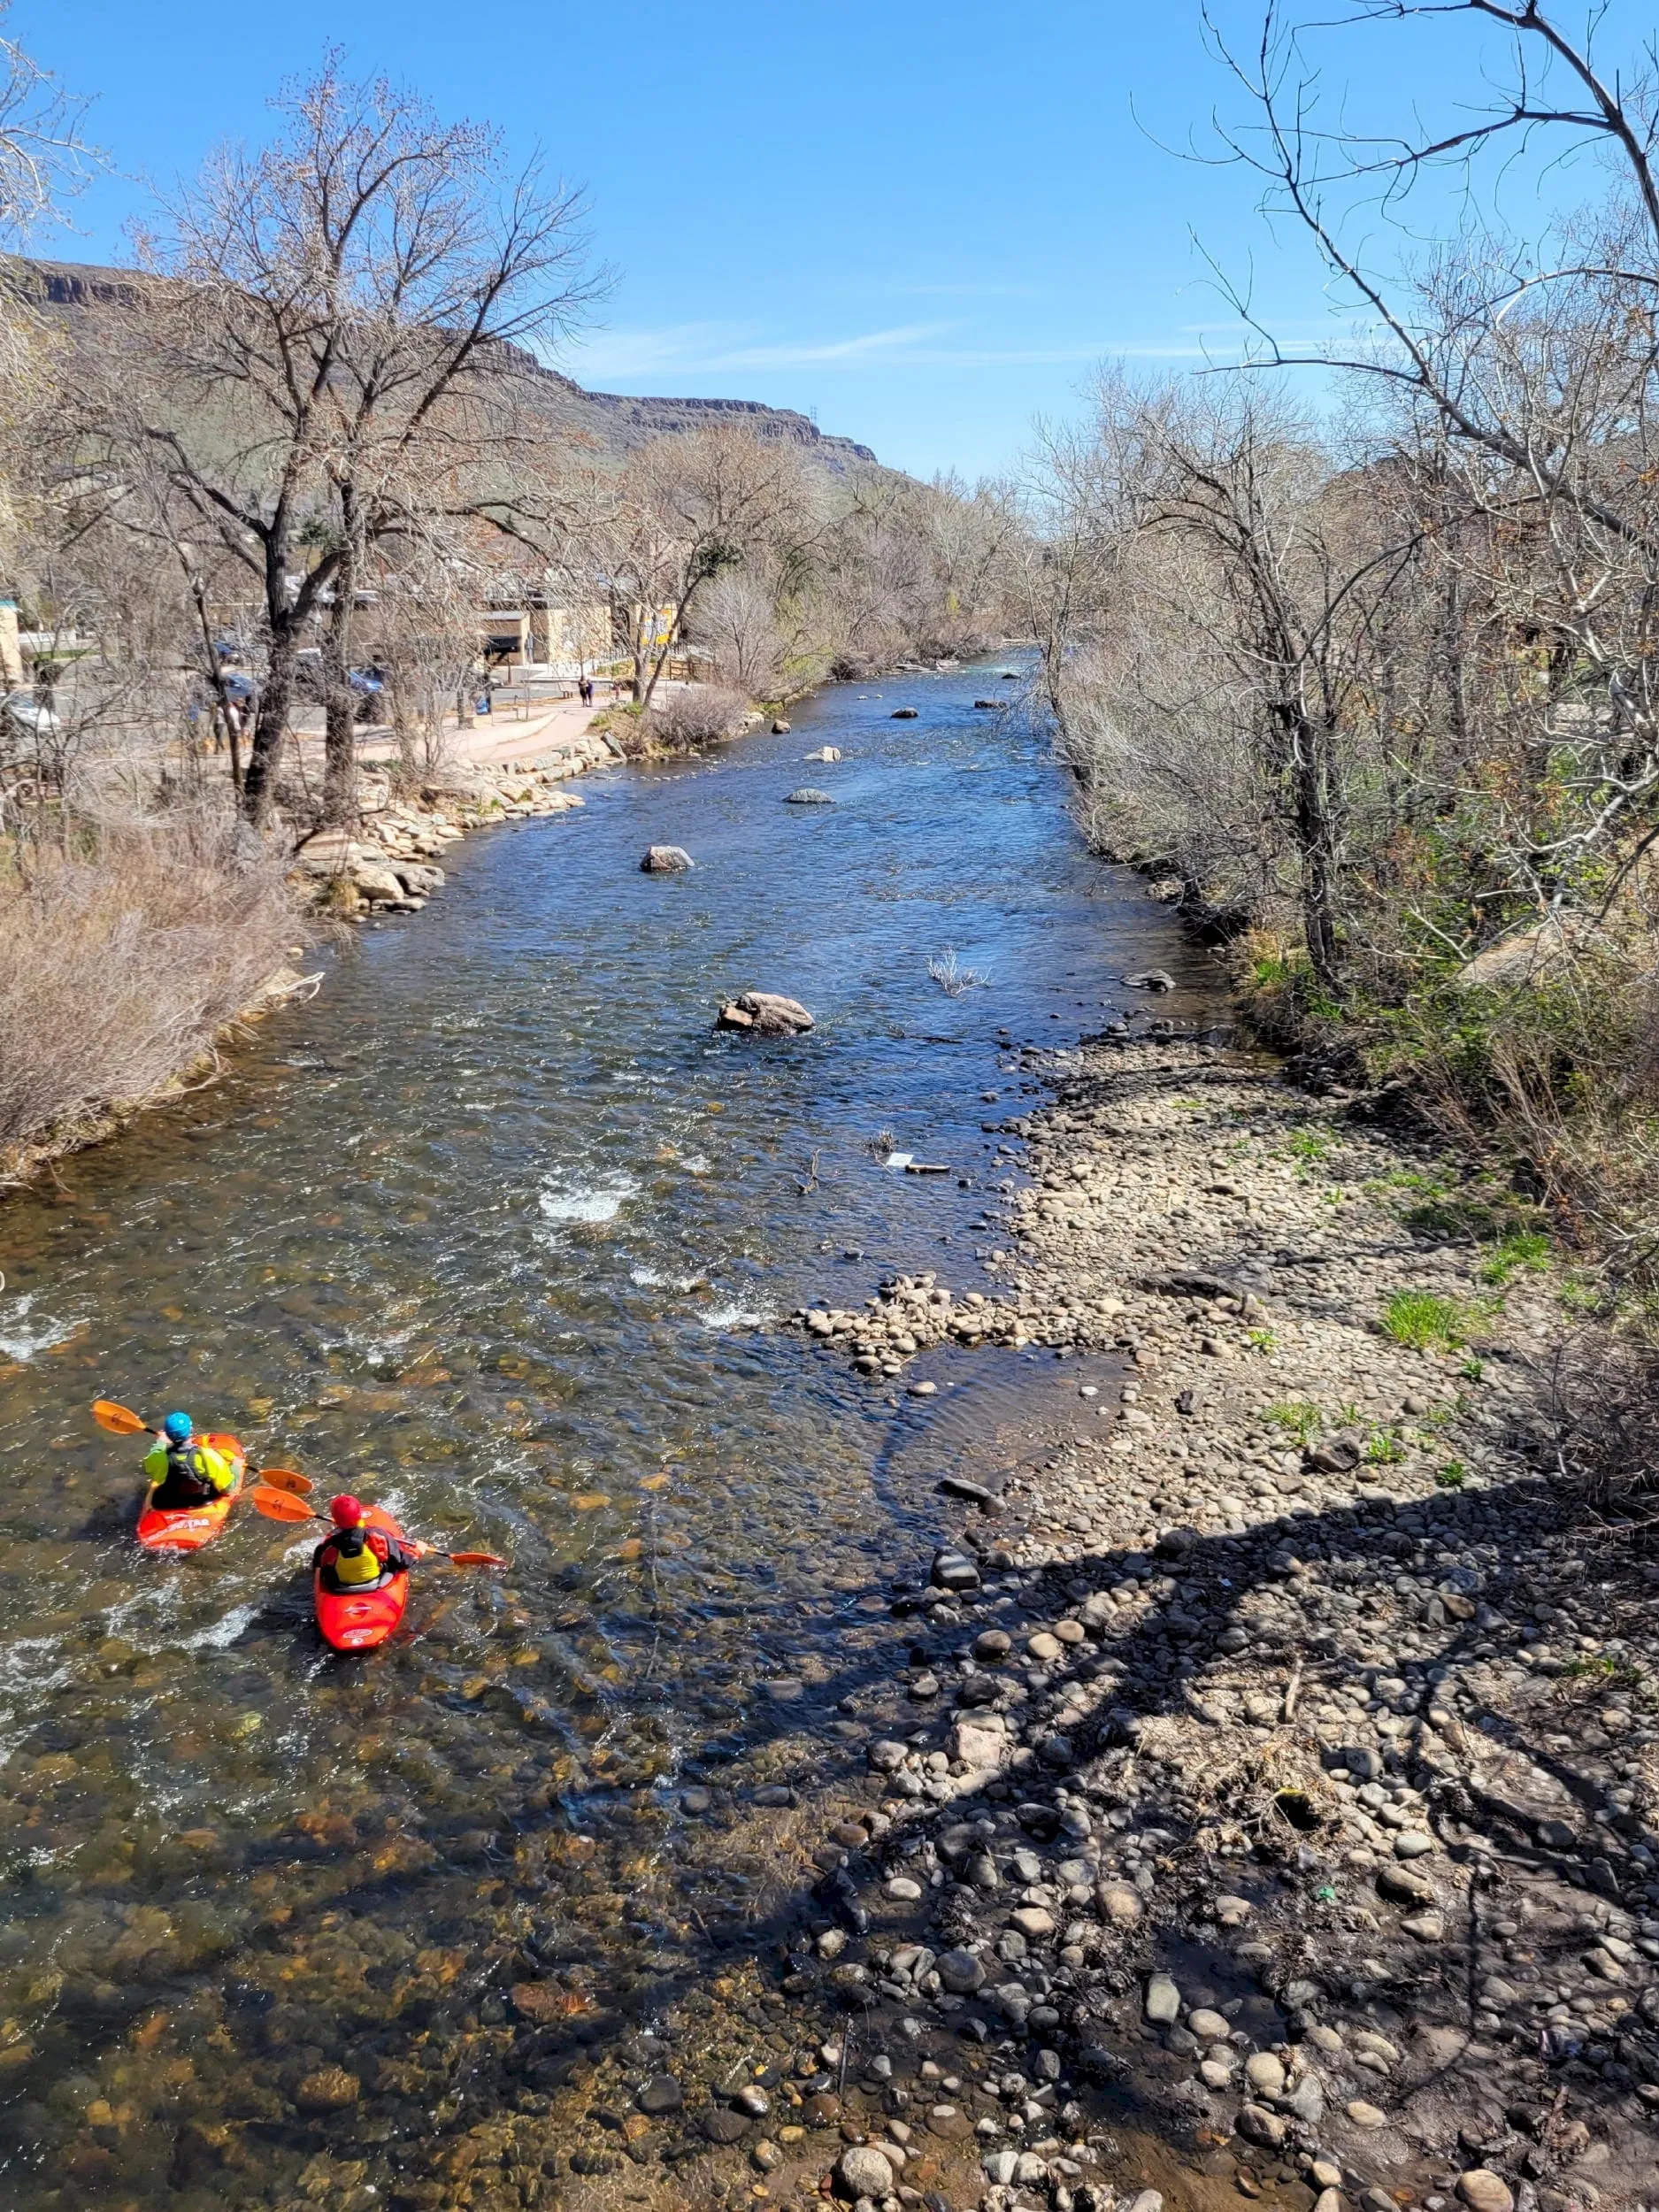 Looking down on a very shallow Clear Creek with two kayakers in red crafts.  Trees are bare but some grass is greening.